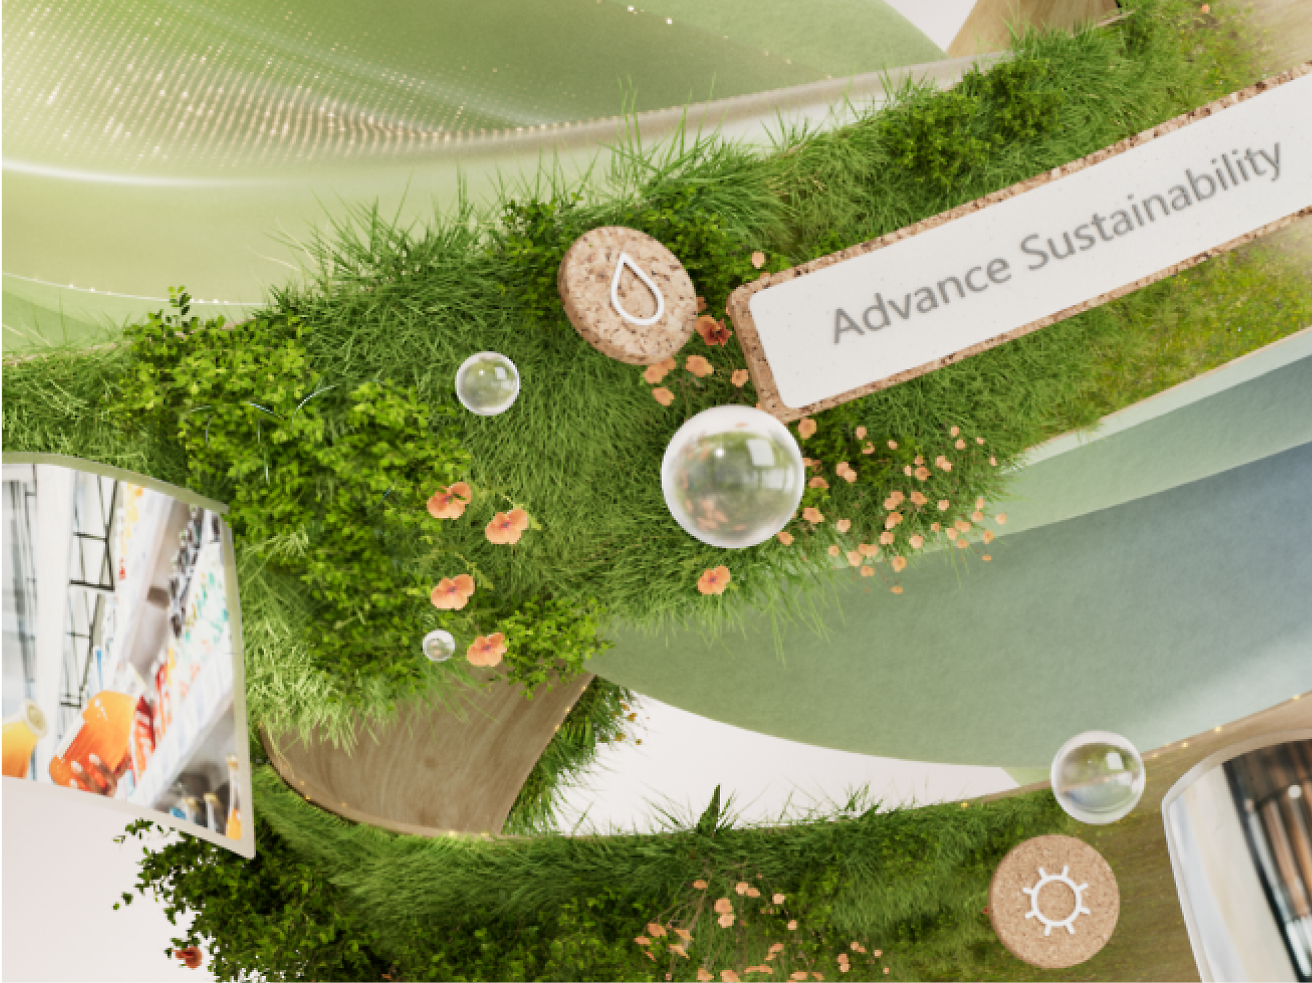 A decorative green installation with grass and flowers displays buttons and text 'Advance Sustainability'.